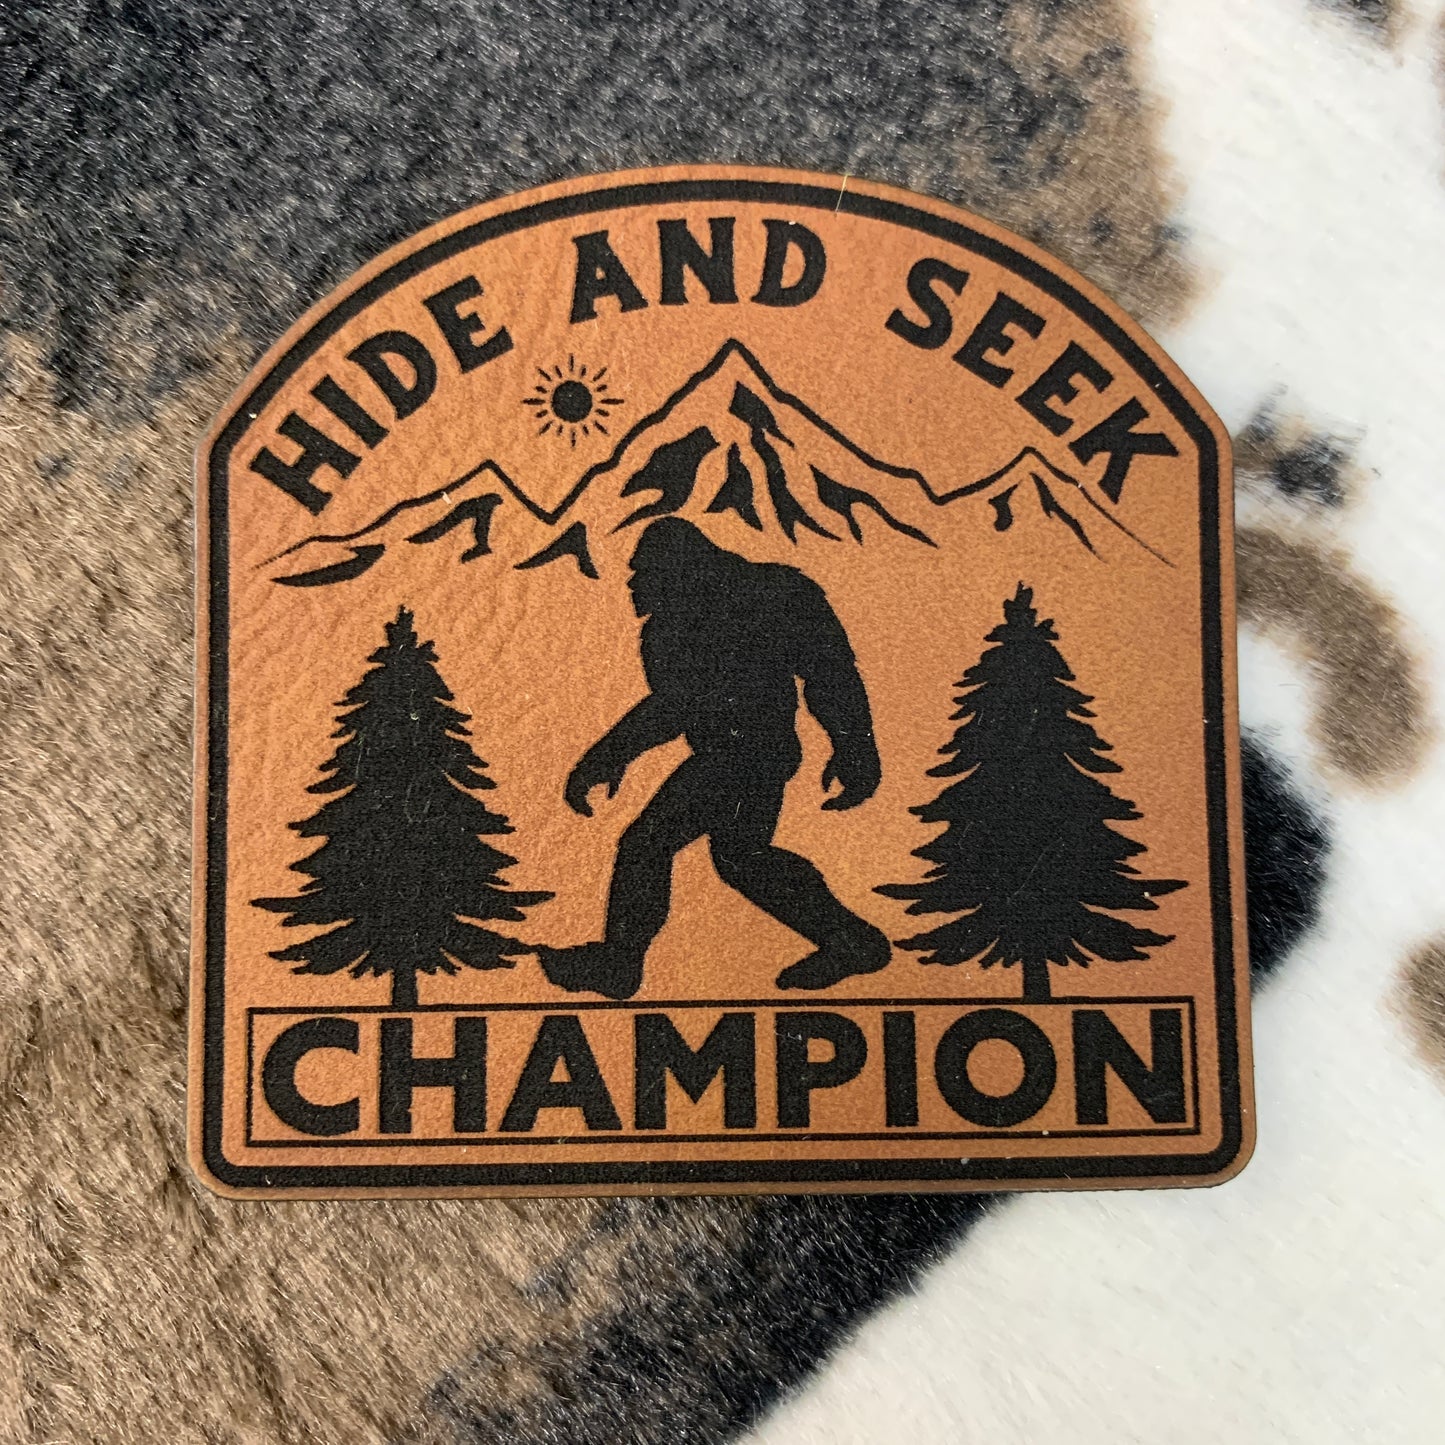 Hide and Seek Champion - 2.5" wide x 2.4" tall Leatherette Patch